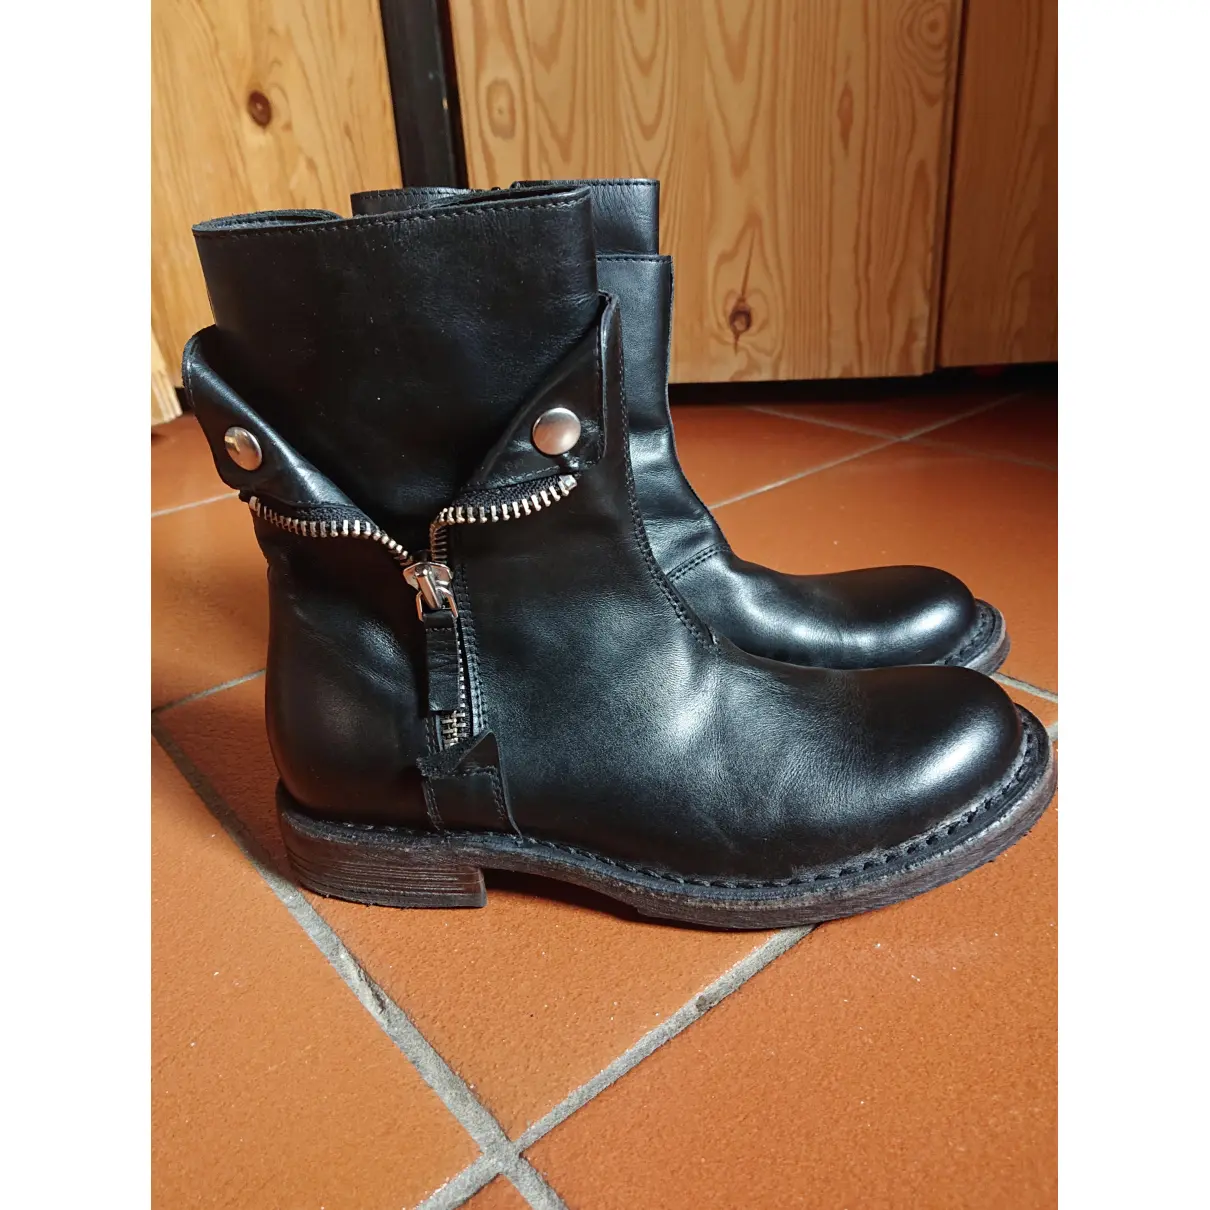 Buy Moma Leather biker boots online